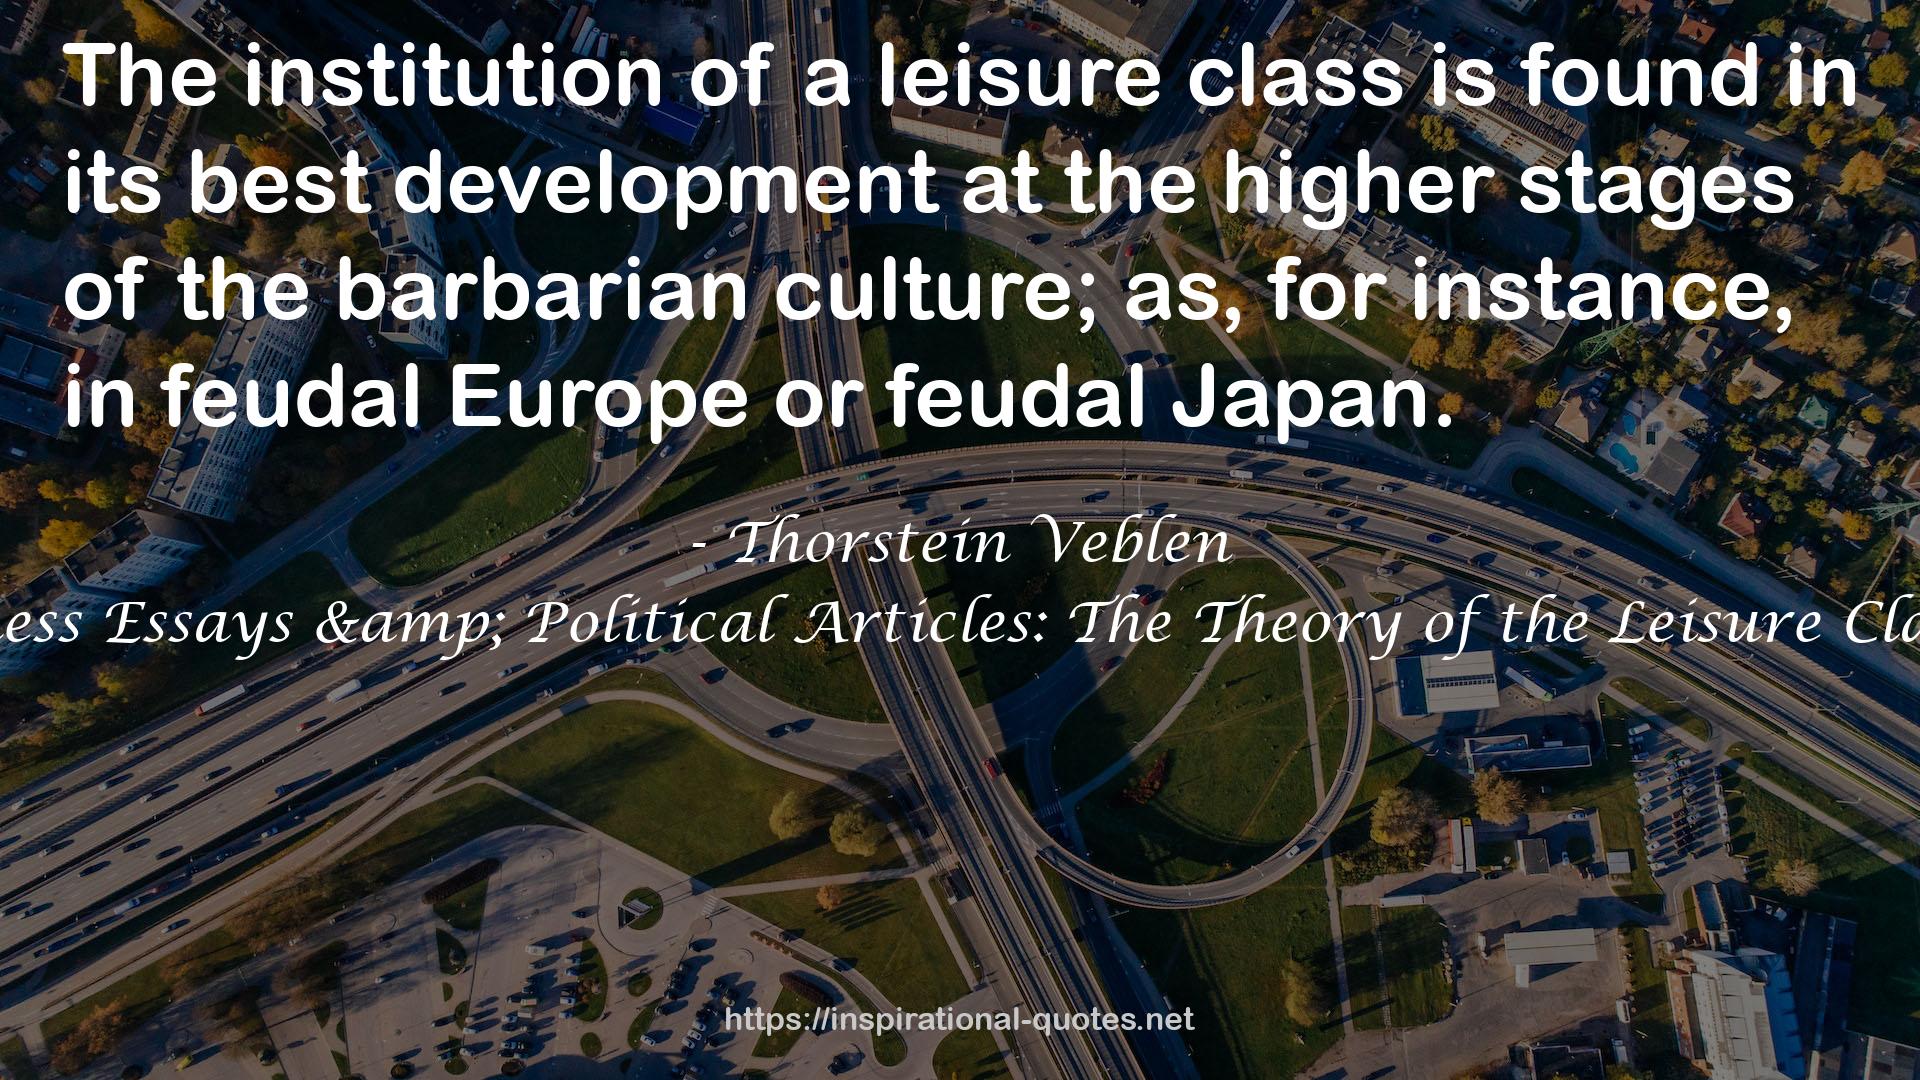 The Complete Works of Thorstein Veblen: Economics Books, Business Essays & Political Articles: The Theory of the Leisure Class, The Theory of Business ... The Use of Loan Credit in Business… QUOTES